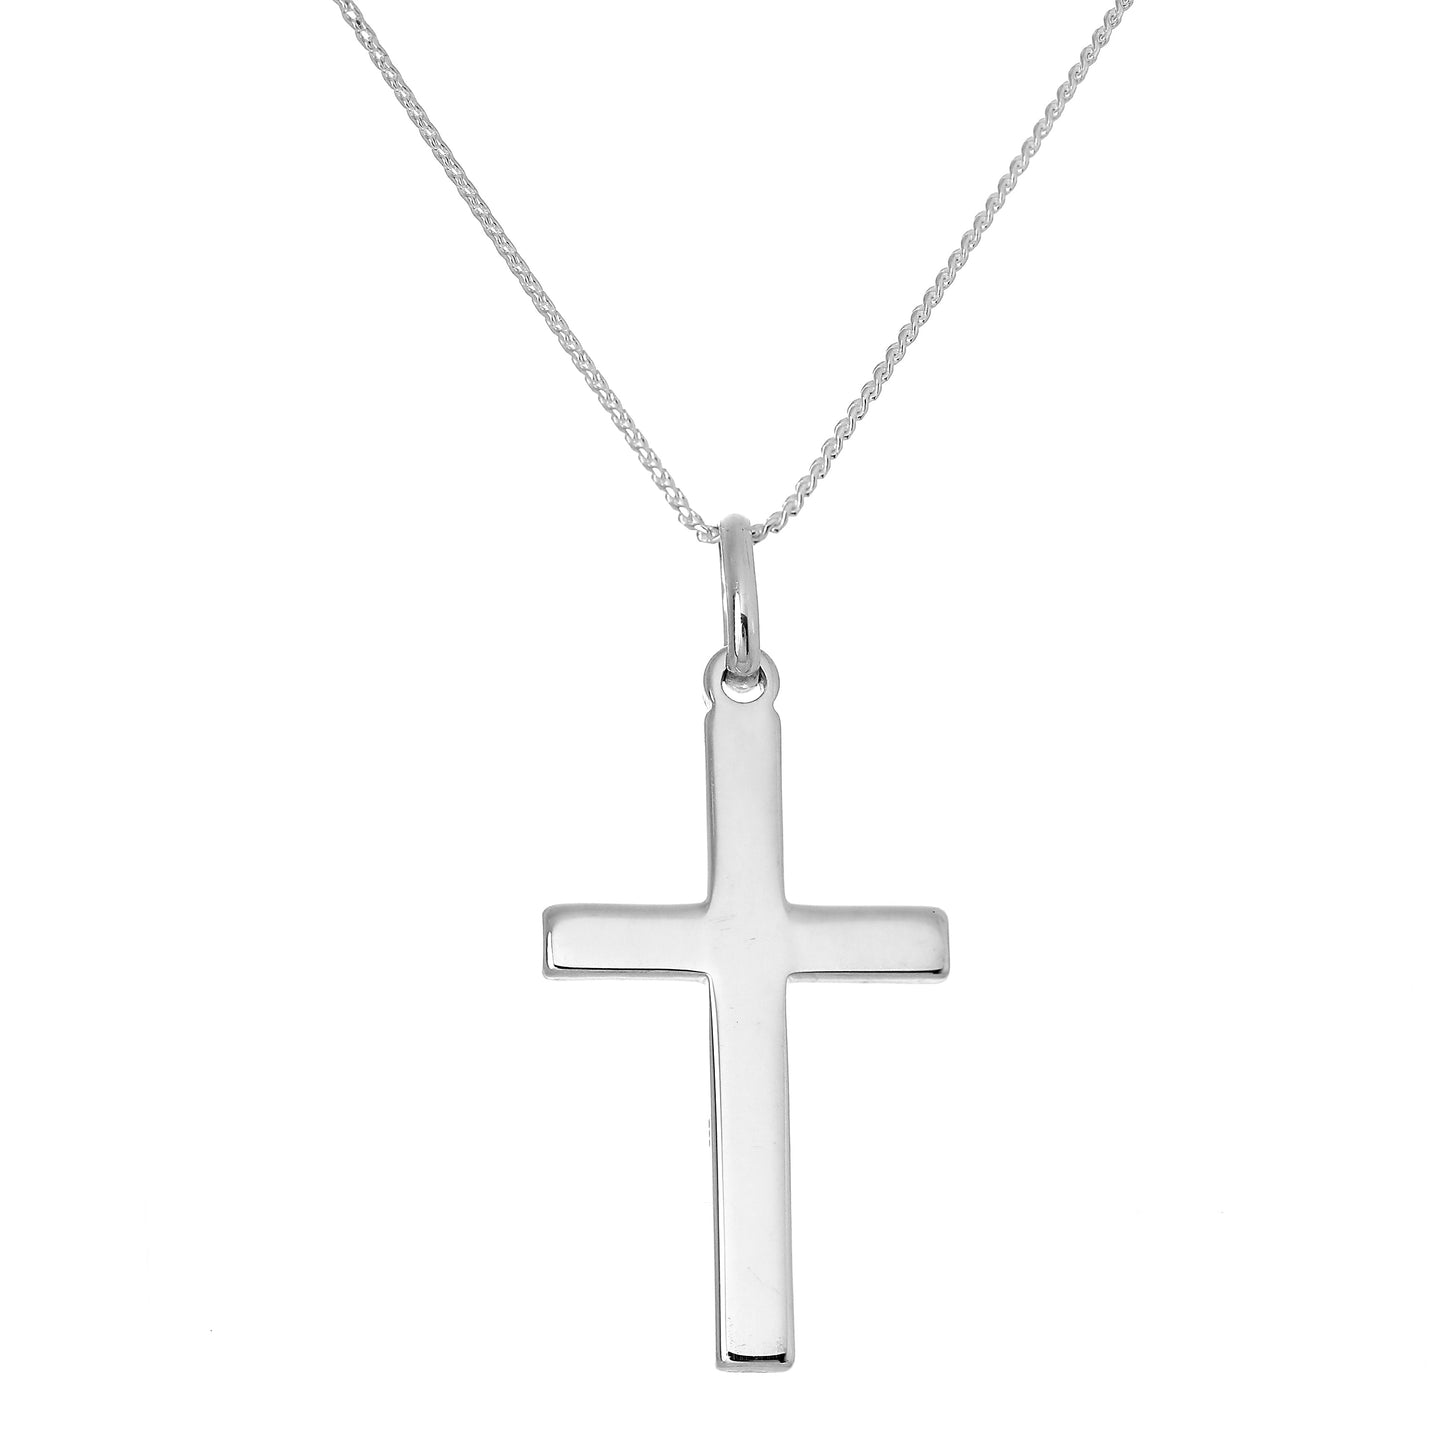 Large Plain Sterling Silver Cross Pendant Necklace 16 - 22 Inches